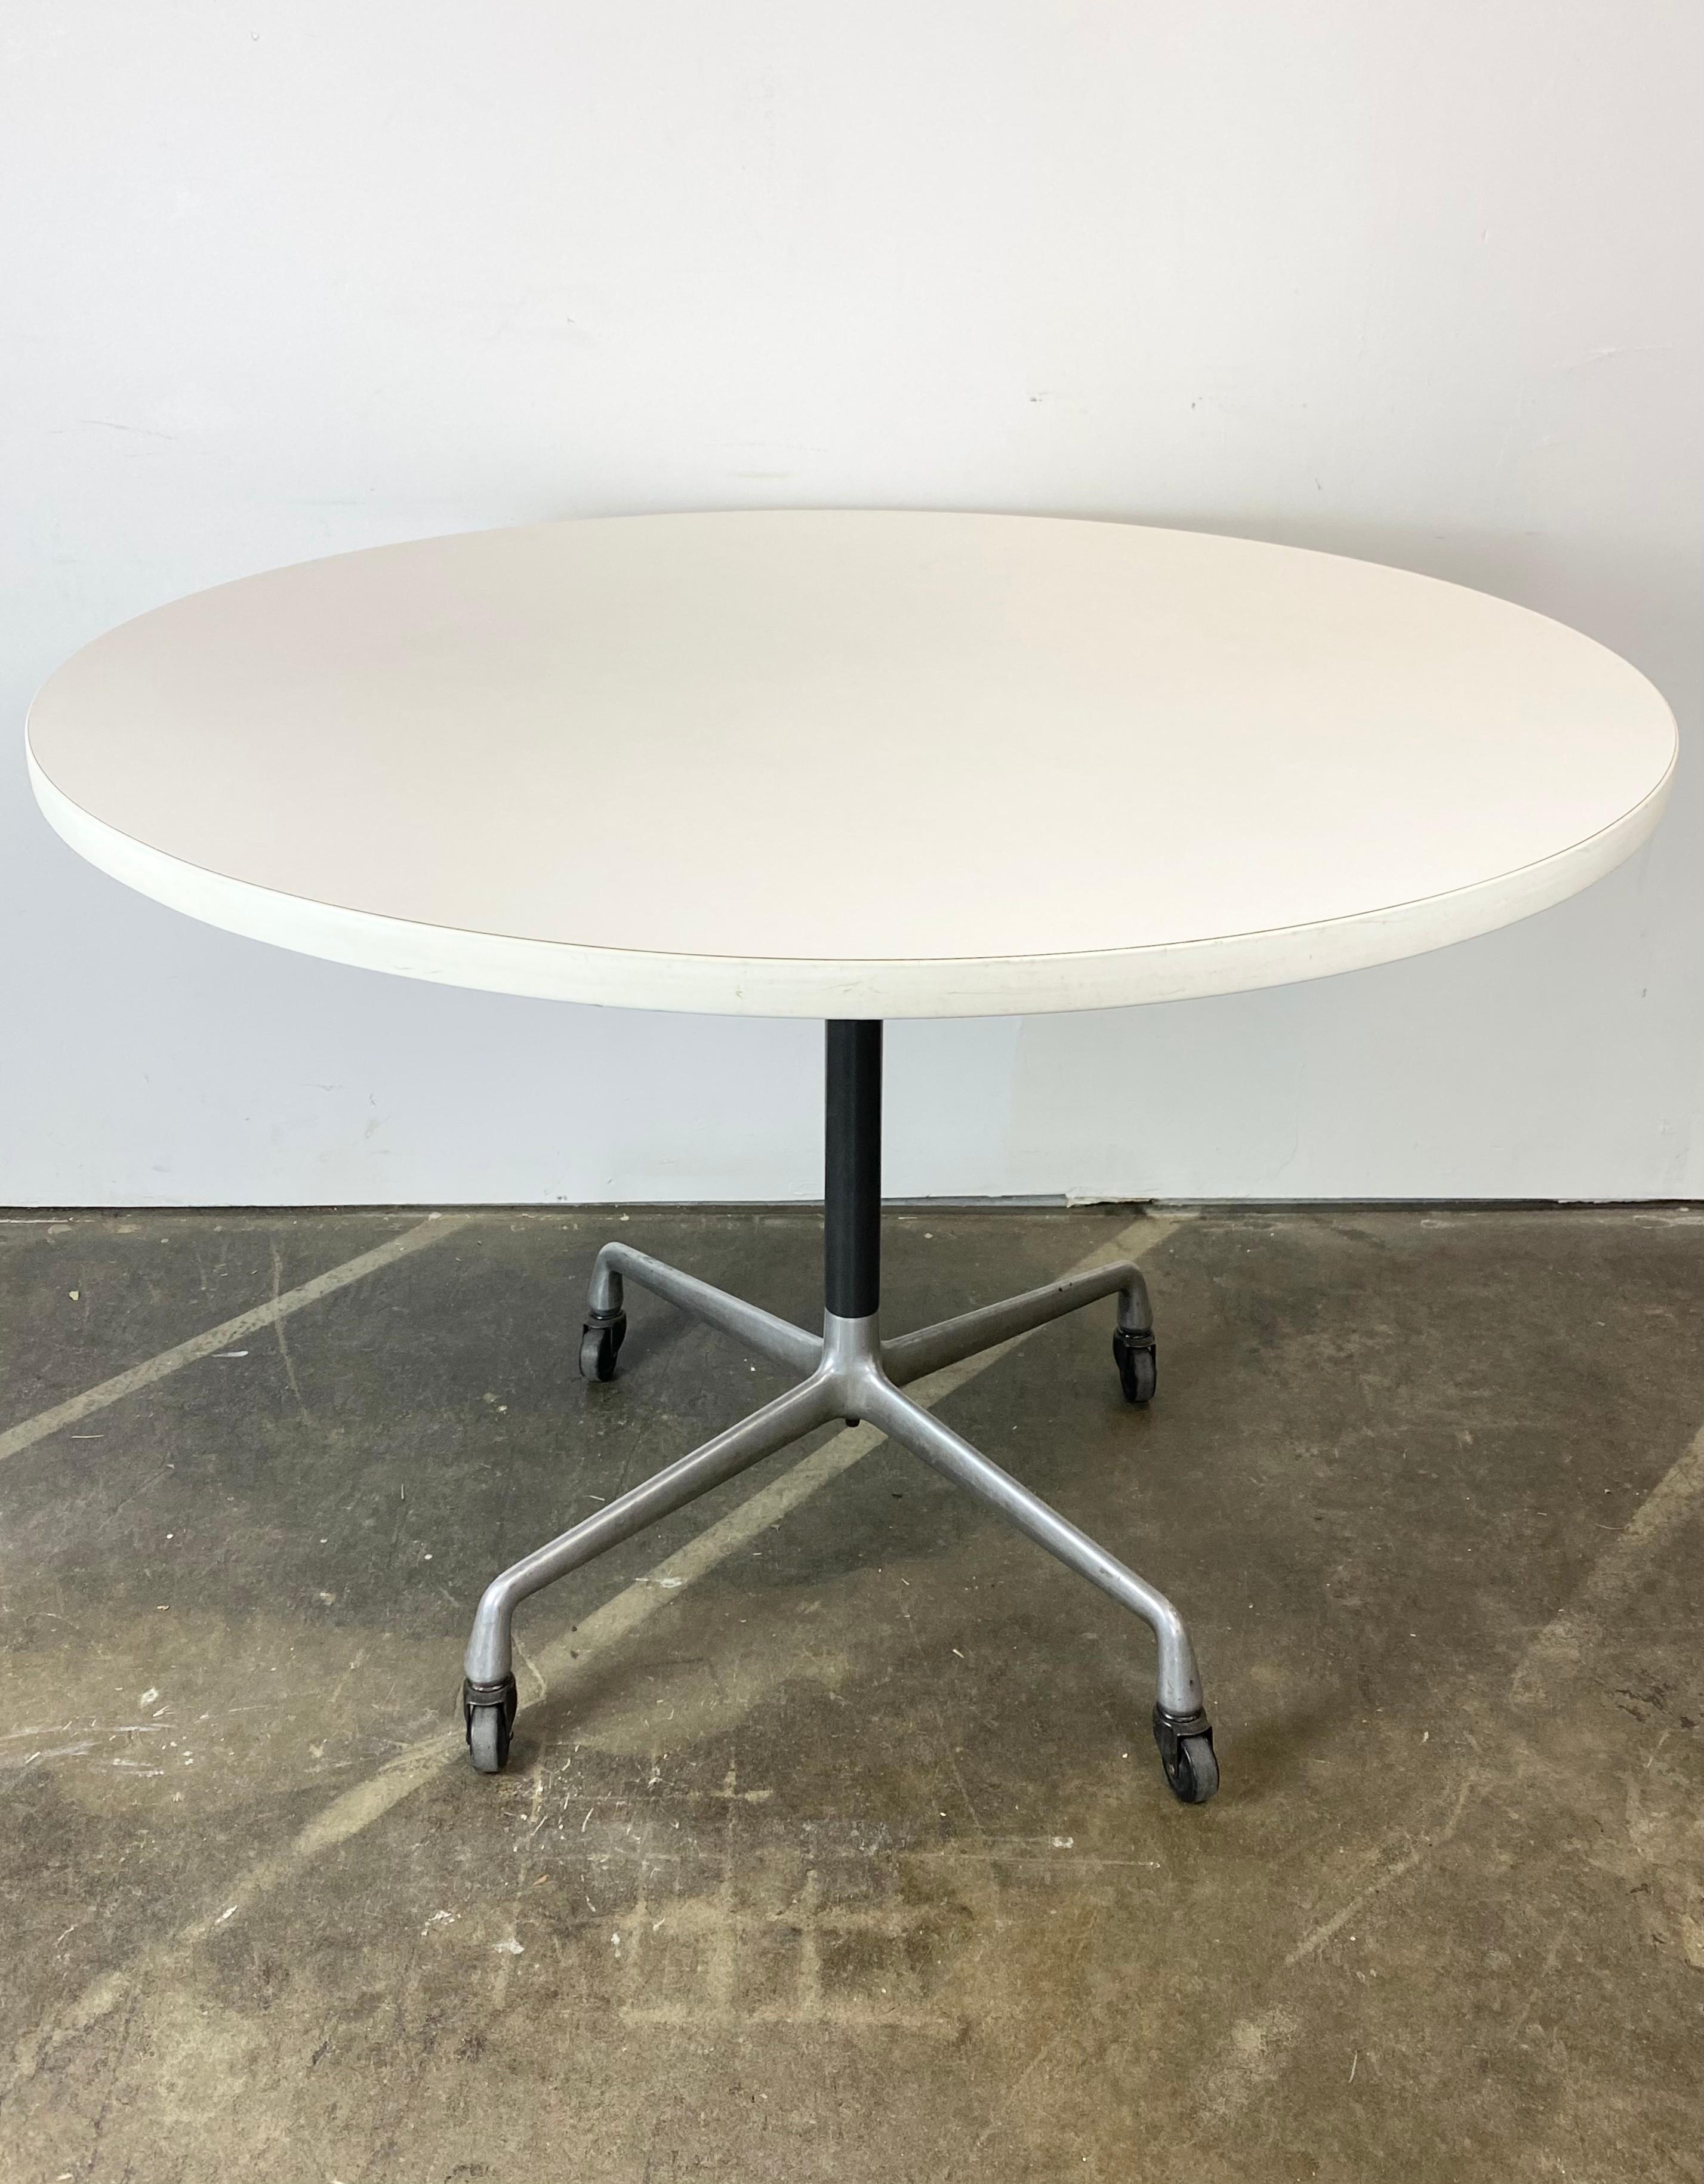 Pleased to offer this classic Herman Miller Eames dining table. Circular tabletop, 42 inches in diameter. With white edge and white laminate too. No egregious wear to the surface. Aluminum pedestal base on casters provide an extra utility function